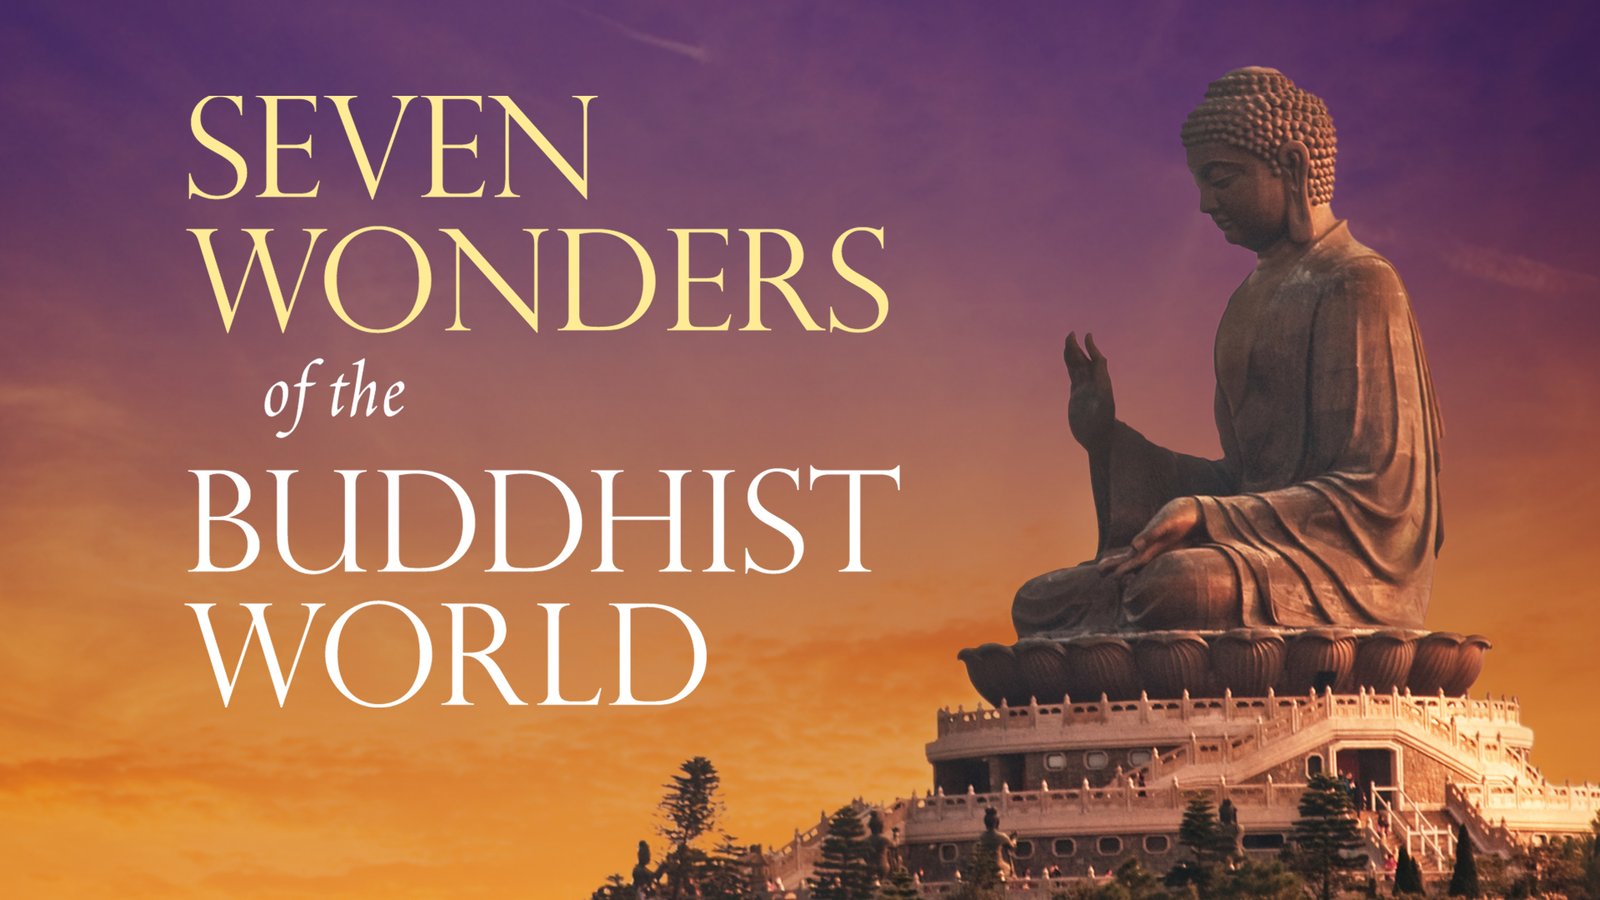 Seven Wonders of the Buddhist World - The History of Buddhism